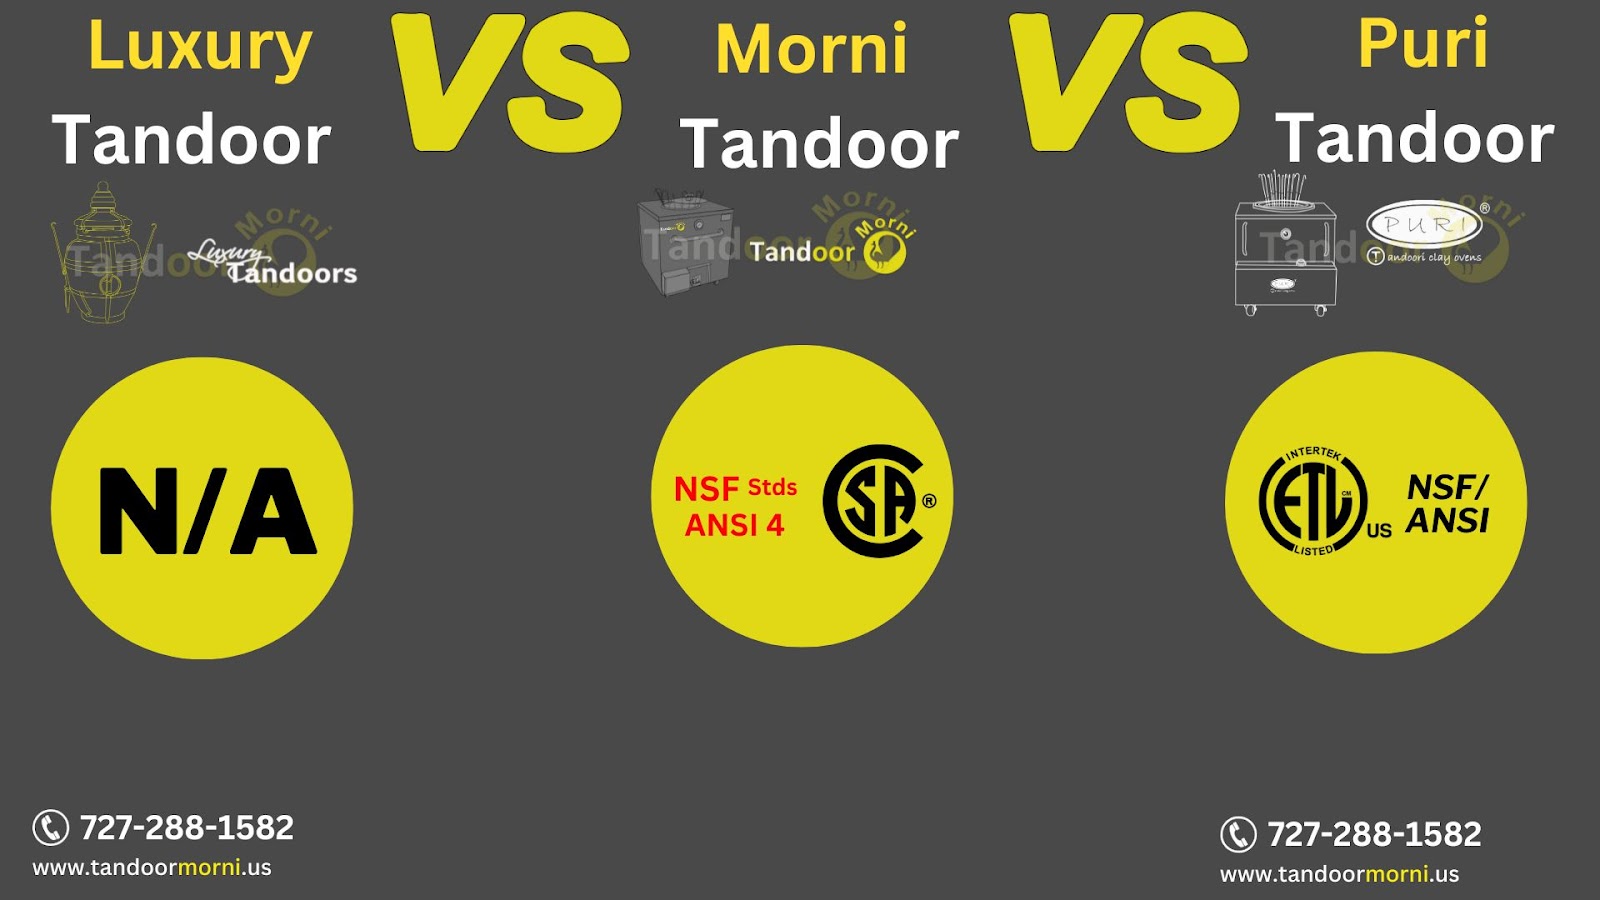 Certification for Luxury Tandoor vs  Morni Tandoor vs Puri Tandoor 

Luxury is not certified, however Morni is NSF standard and ANSI CSA certified, and Puri is ETL and NSF ANSI certified.